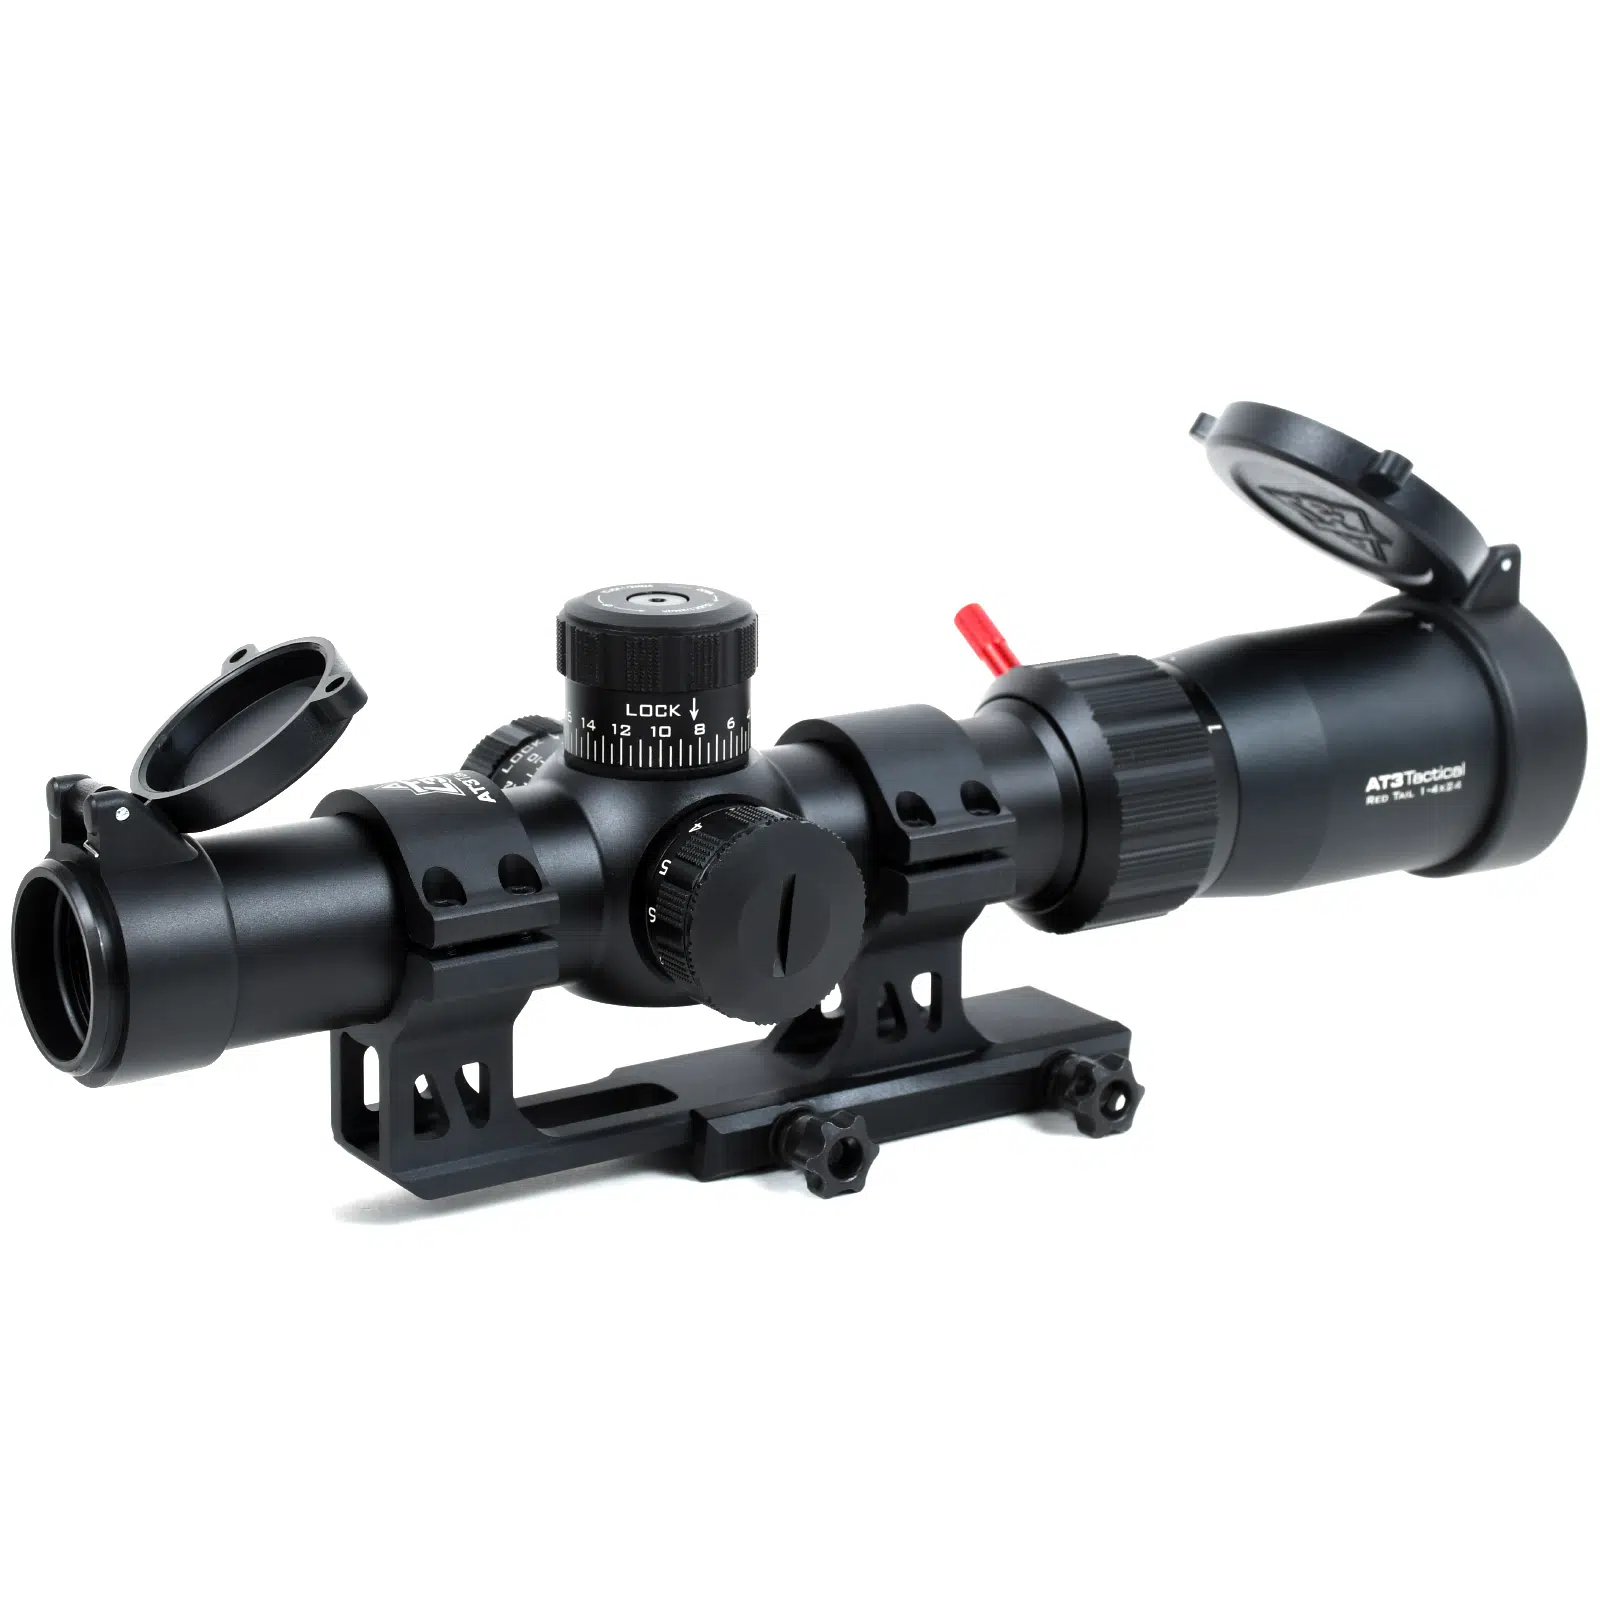 AT3™ Red Tail™ Rifle Scope with Locking Caps – 1-4x or 1-6x Magnification – 5.56 Illuminated BDC Reticle